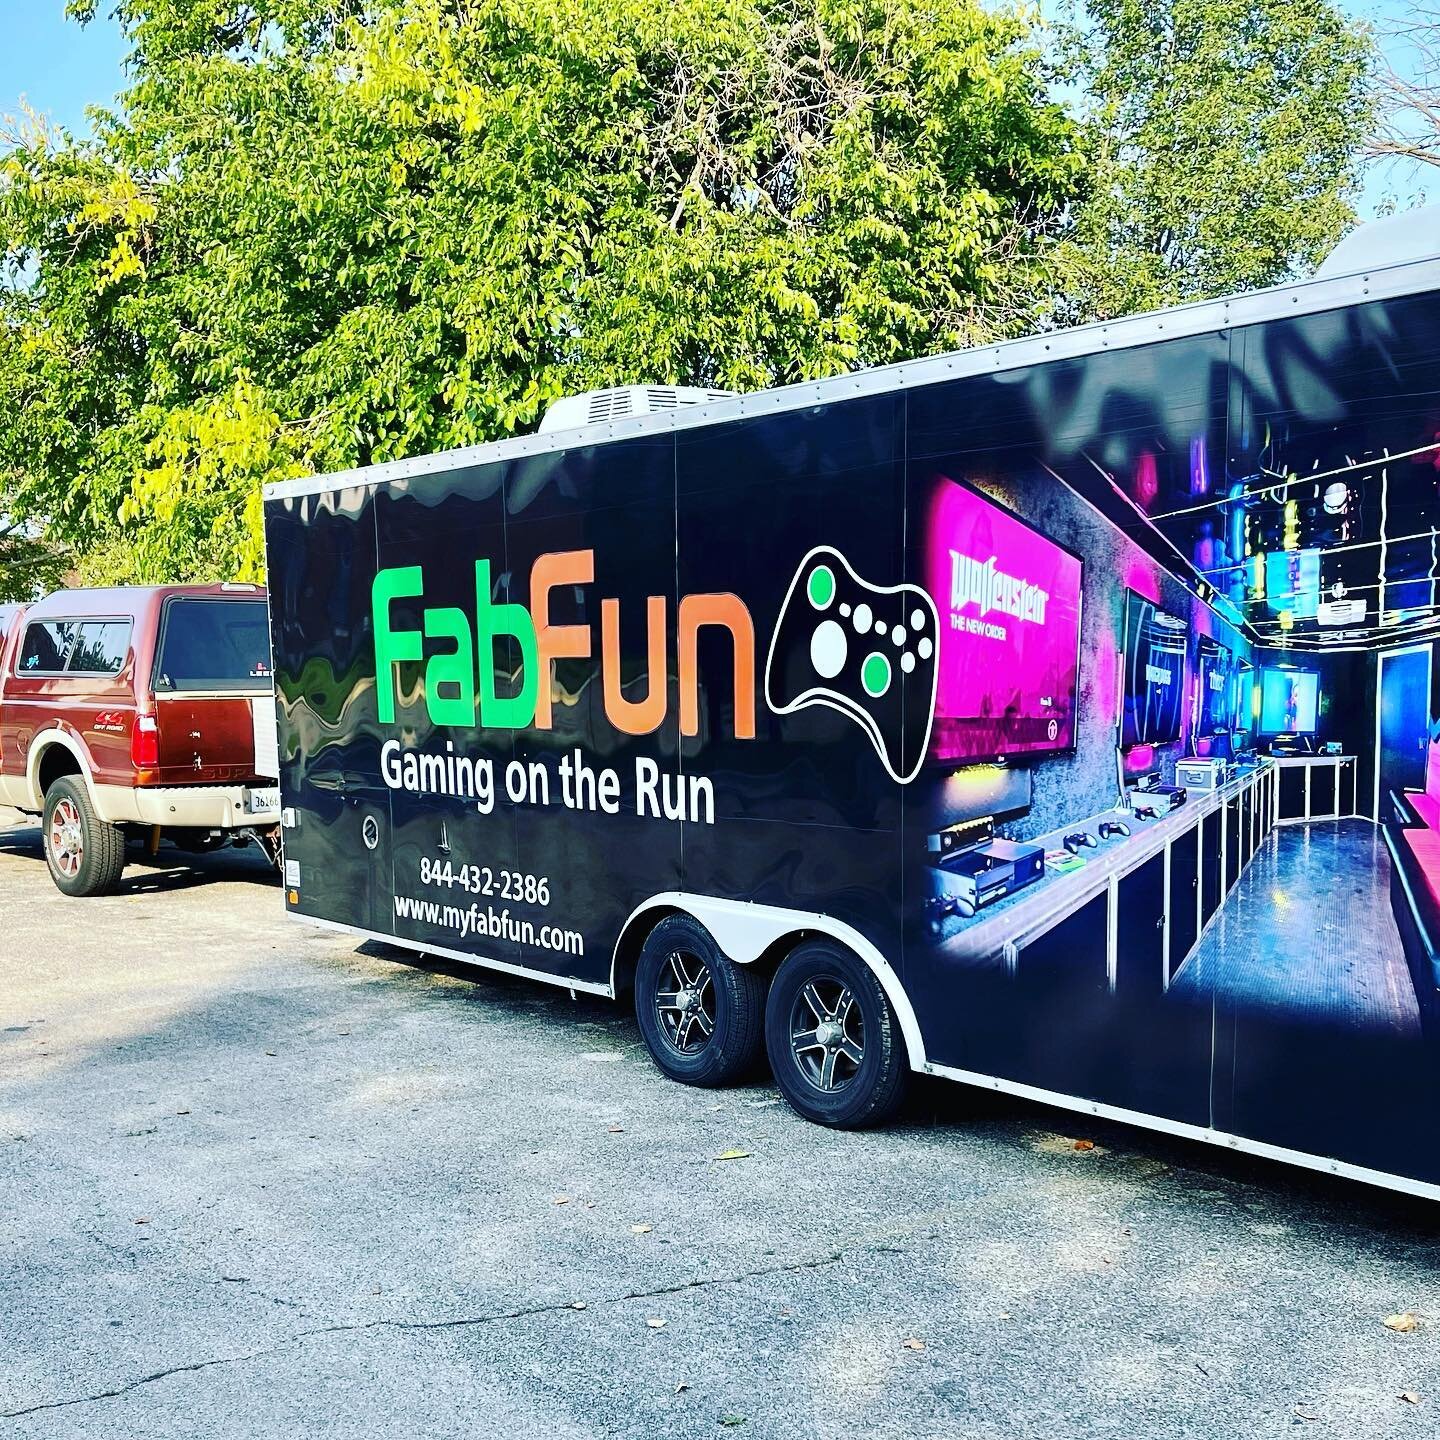 #FabFunGameTrucks would like to thank #bethelnewlife #chruch for letting us there parking lot. #kids #party  #church #family #tractor #trailer #ford #truck #ps5  #xbox #nintendo  #nintendoswitch #dj #invitation #westside  for booking call 844-432-238